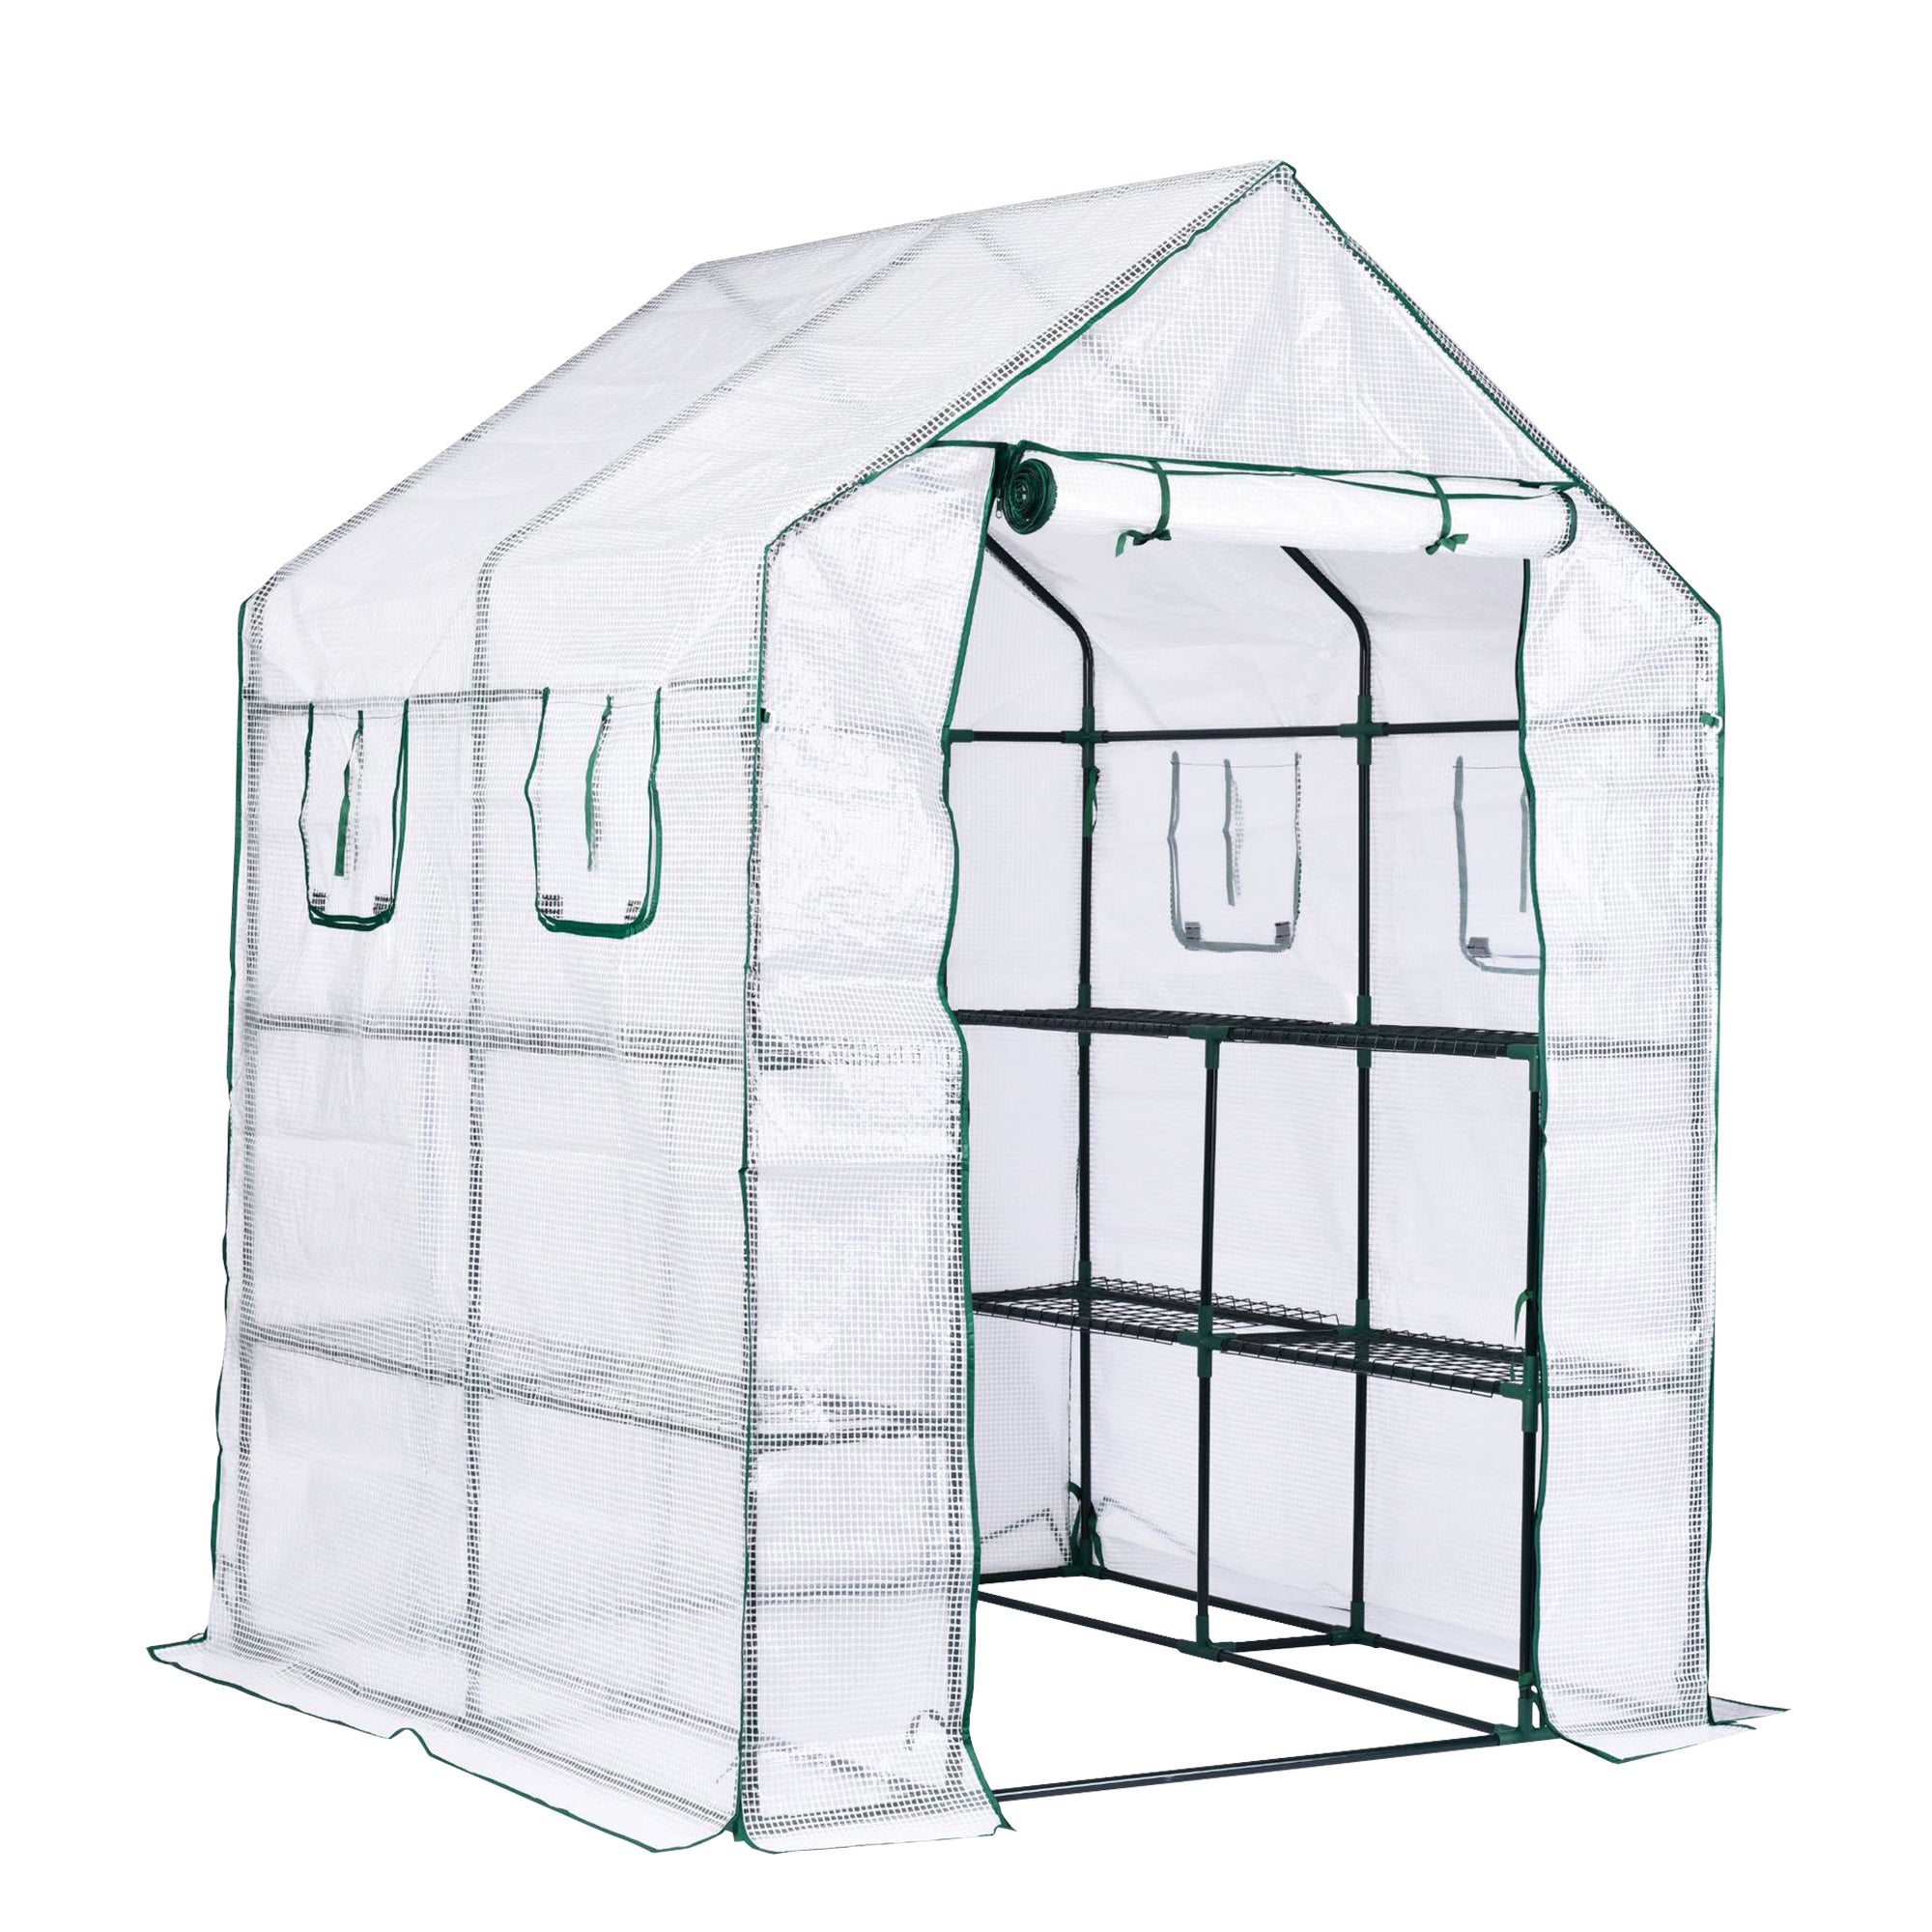 Garden Elements Personal Plastic Indoor/Outdoor Standing Greenhouse For Seed Starting and Propagation, Frost Protection, Clear, Large, 56" x 56" x 77"